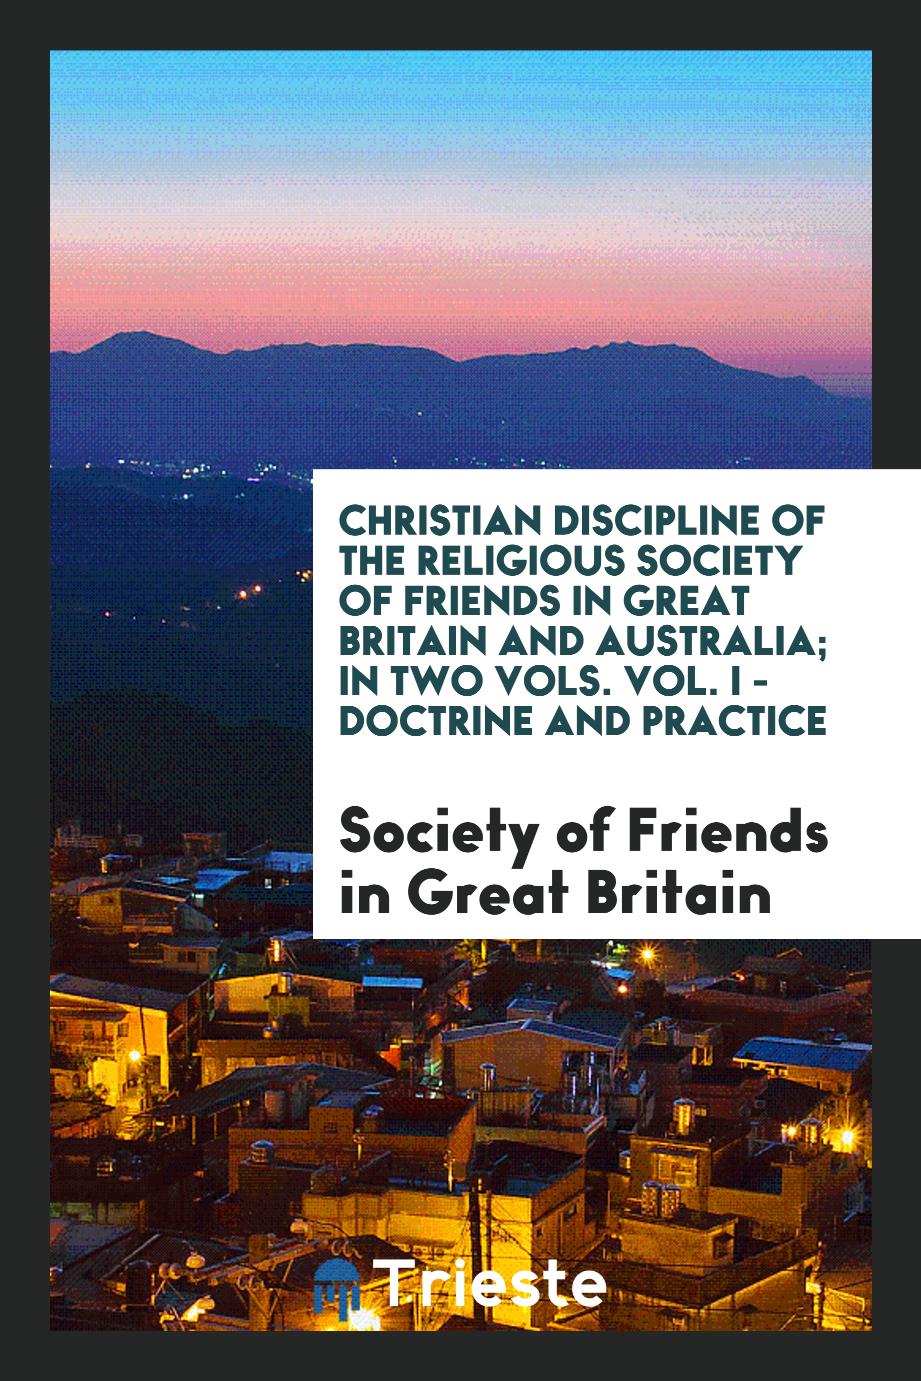 Christian Discipline of the Religious Society of Friends in Great Britain and Australia; In Two Vols. Vol. I - Doctrine and Practice